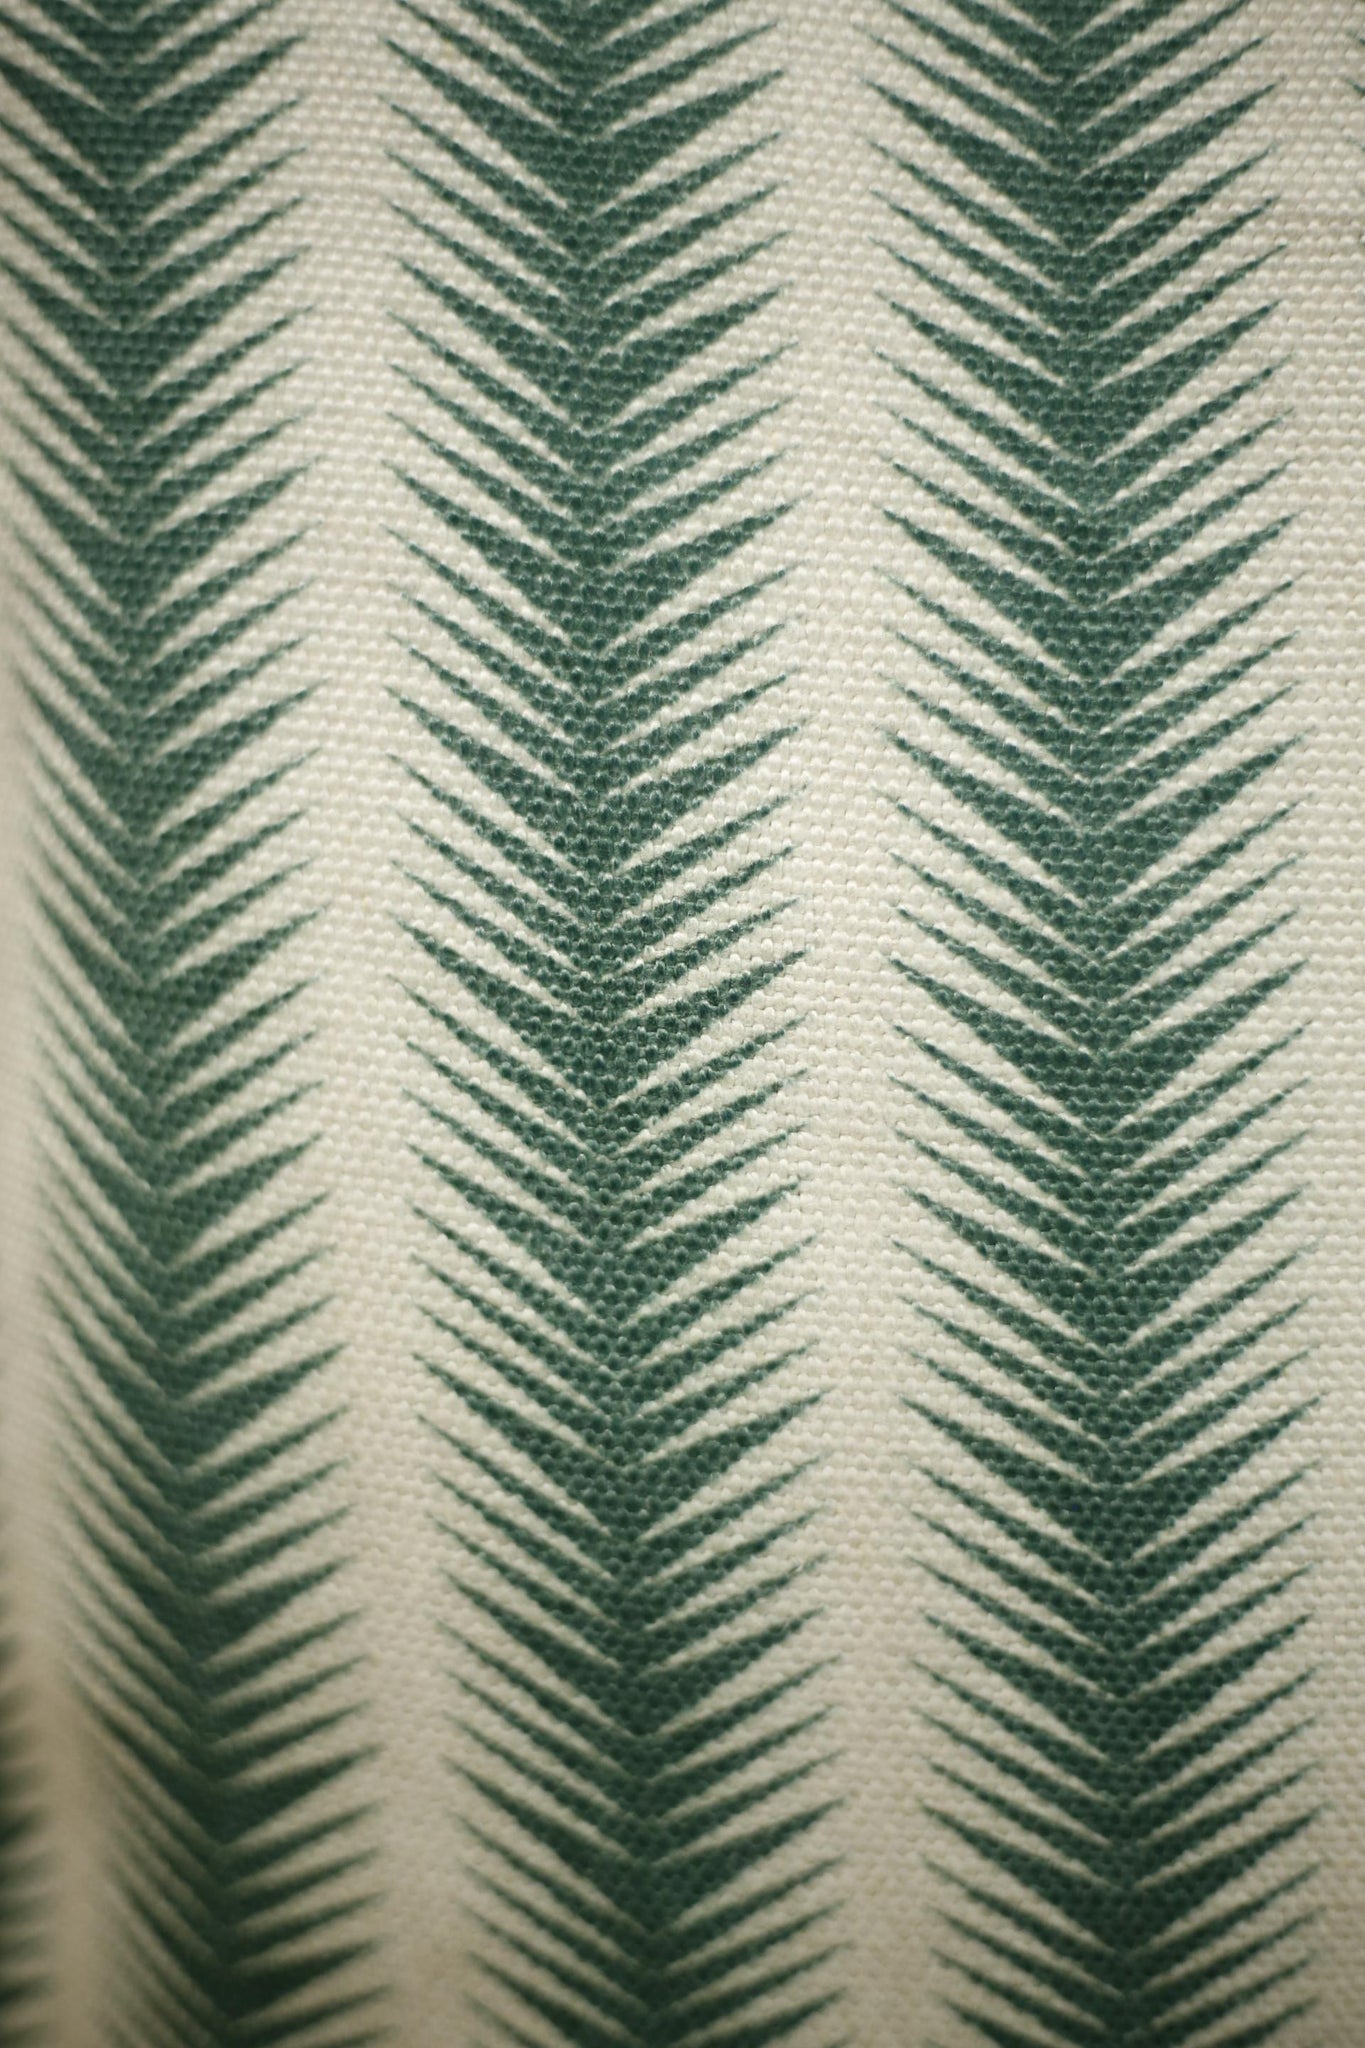 Green palm leaf pattern scatter cushions- 20 inch